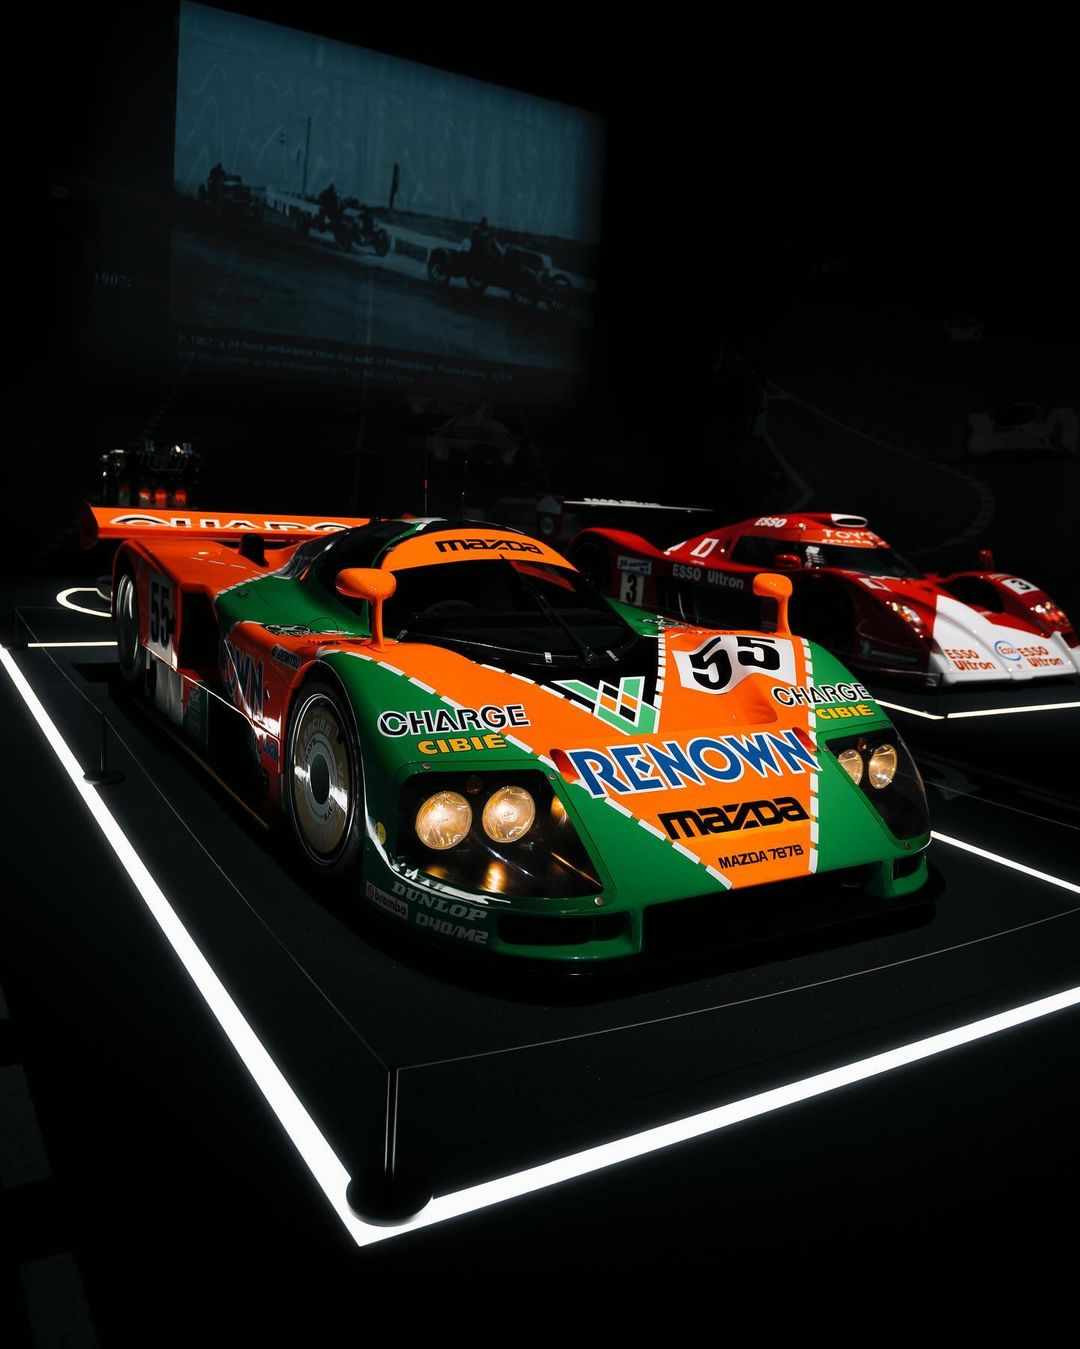 General 1080x1349 Le Mans racing stripes Le Mans Prototype Mazda Mazda 787B Japanese cars race cars livery